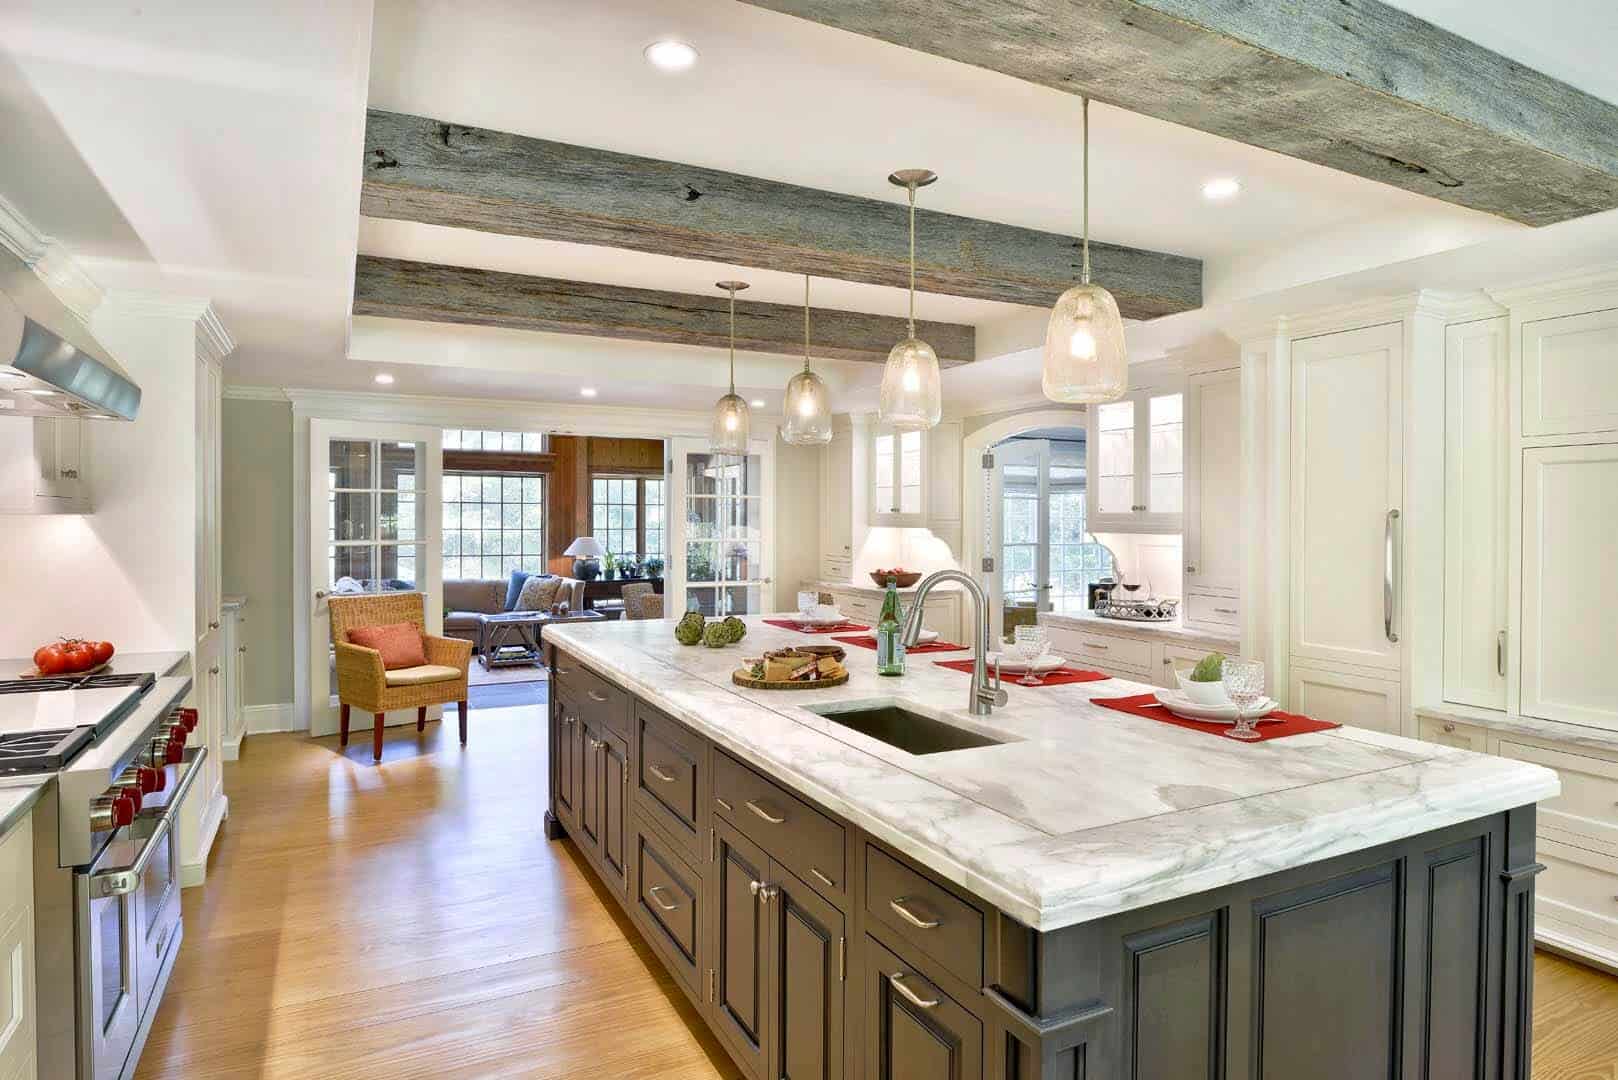 Expansive kitchen in North Salem NY features exposed beams, white Bilotta cabinetry and large grey island with marble top.